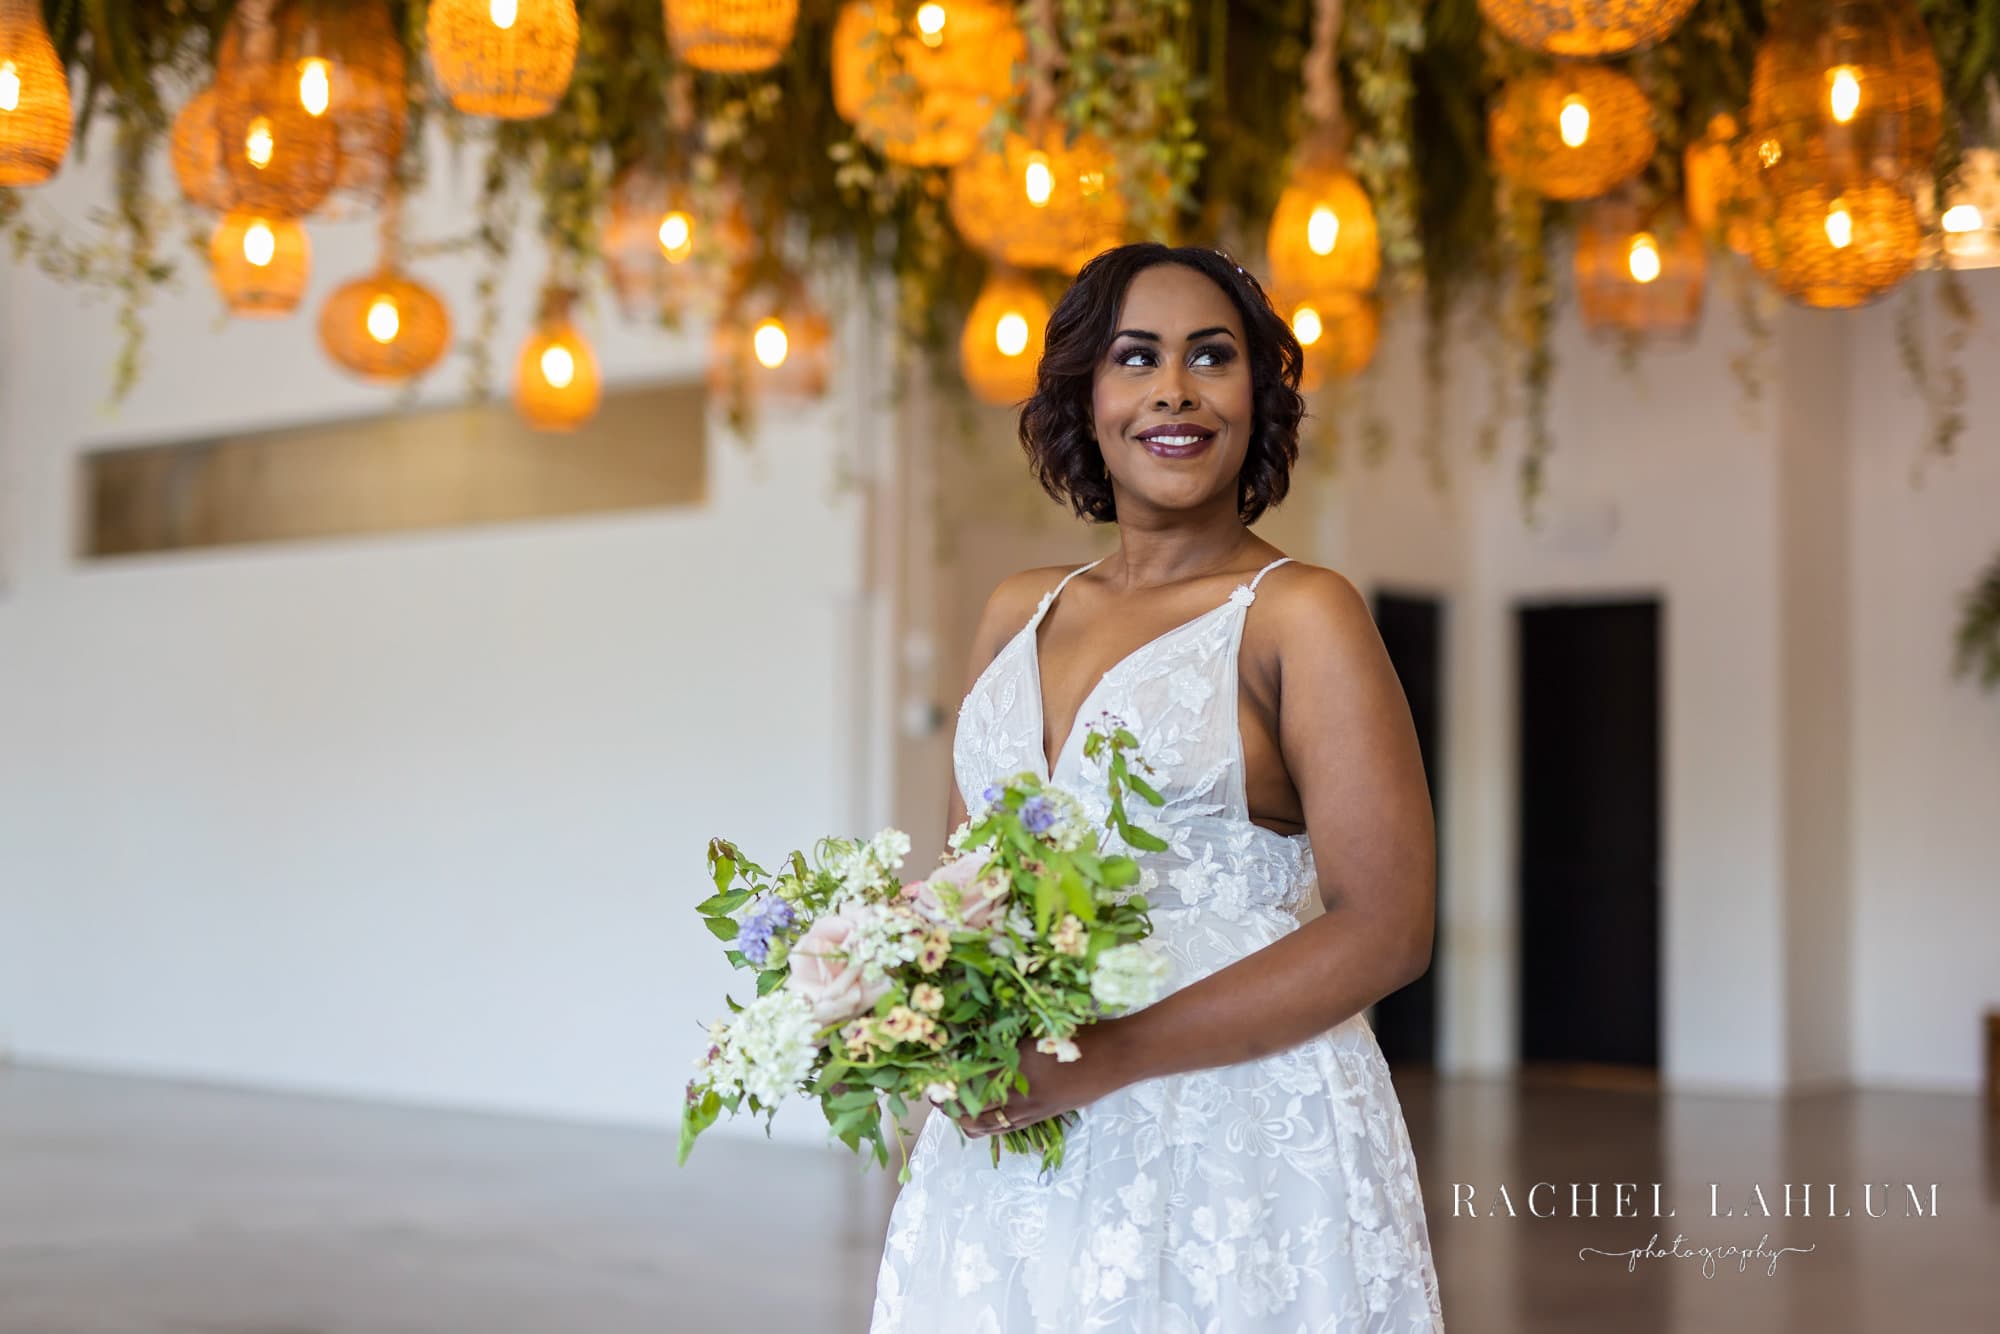 Bride poses its bouquet under greenery and lighting fixture during stylized wedding photo shoot at Urban Daisy Event Space.